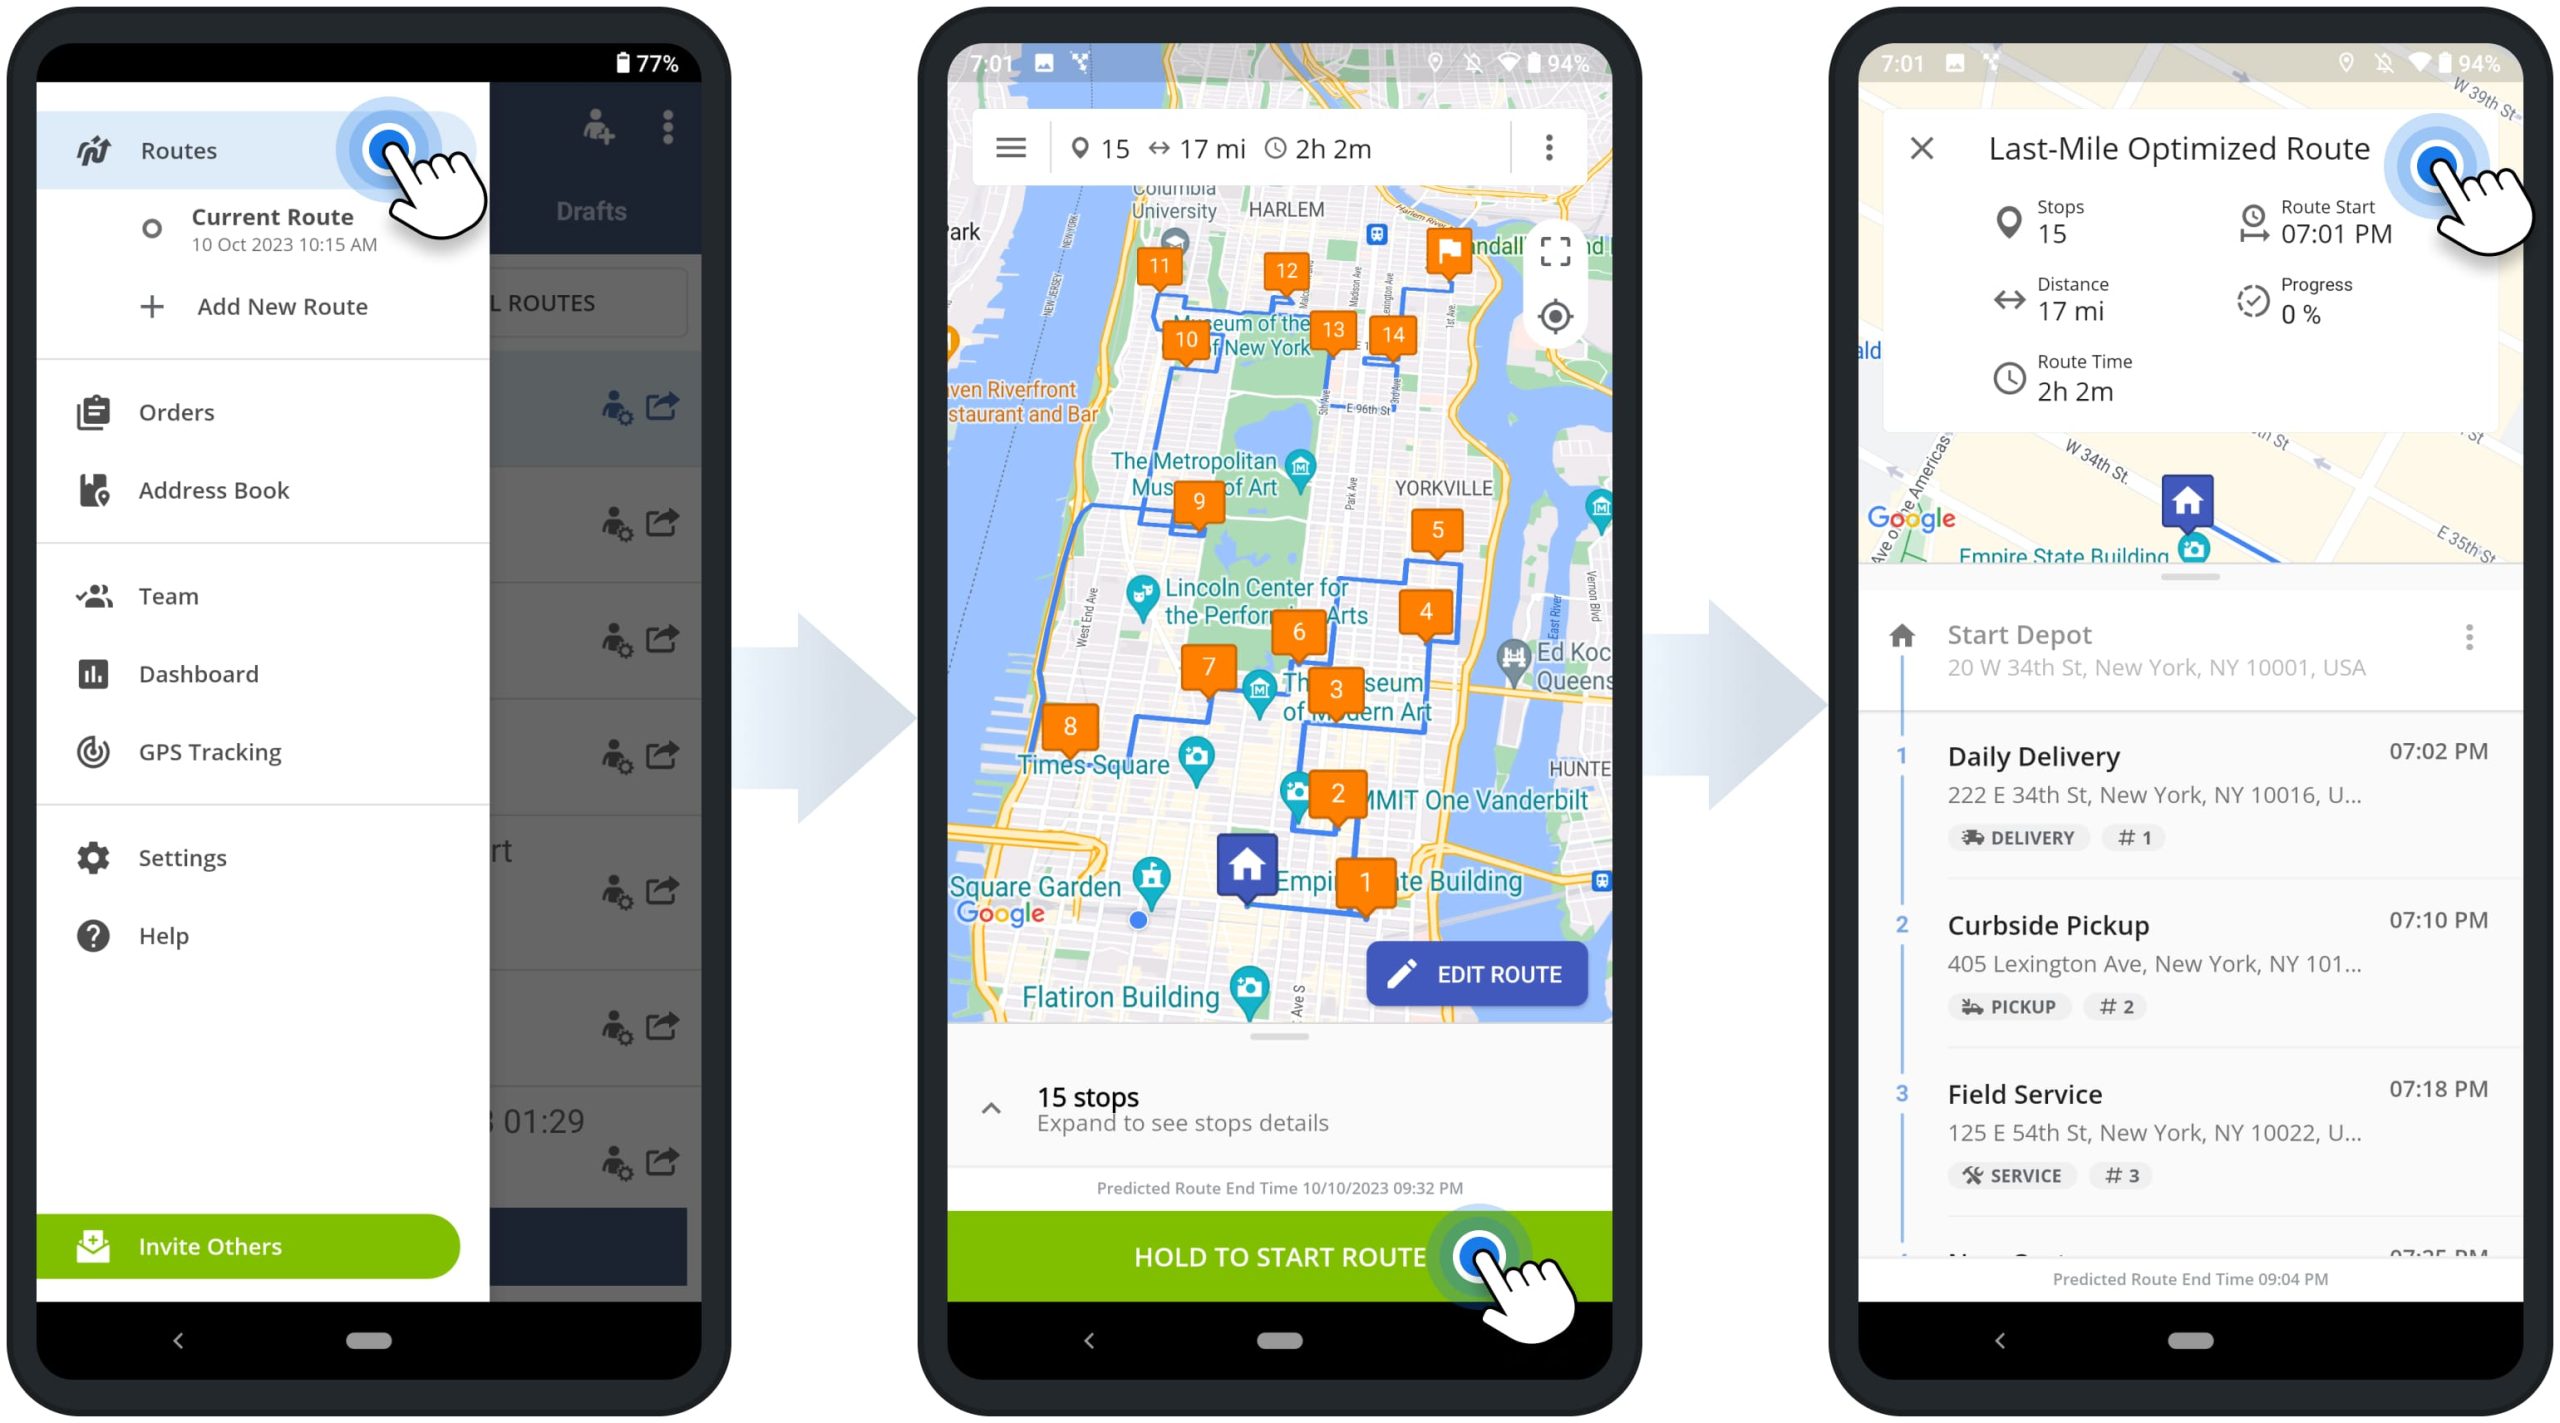 Open and start route navigation on Route4Me's Android route planner app for delivery and field service drivers.